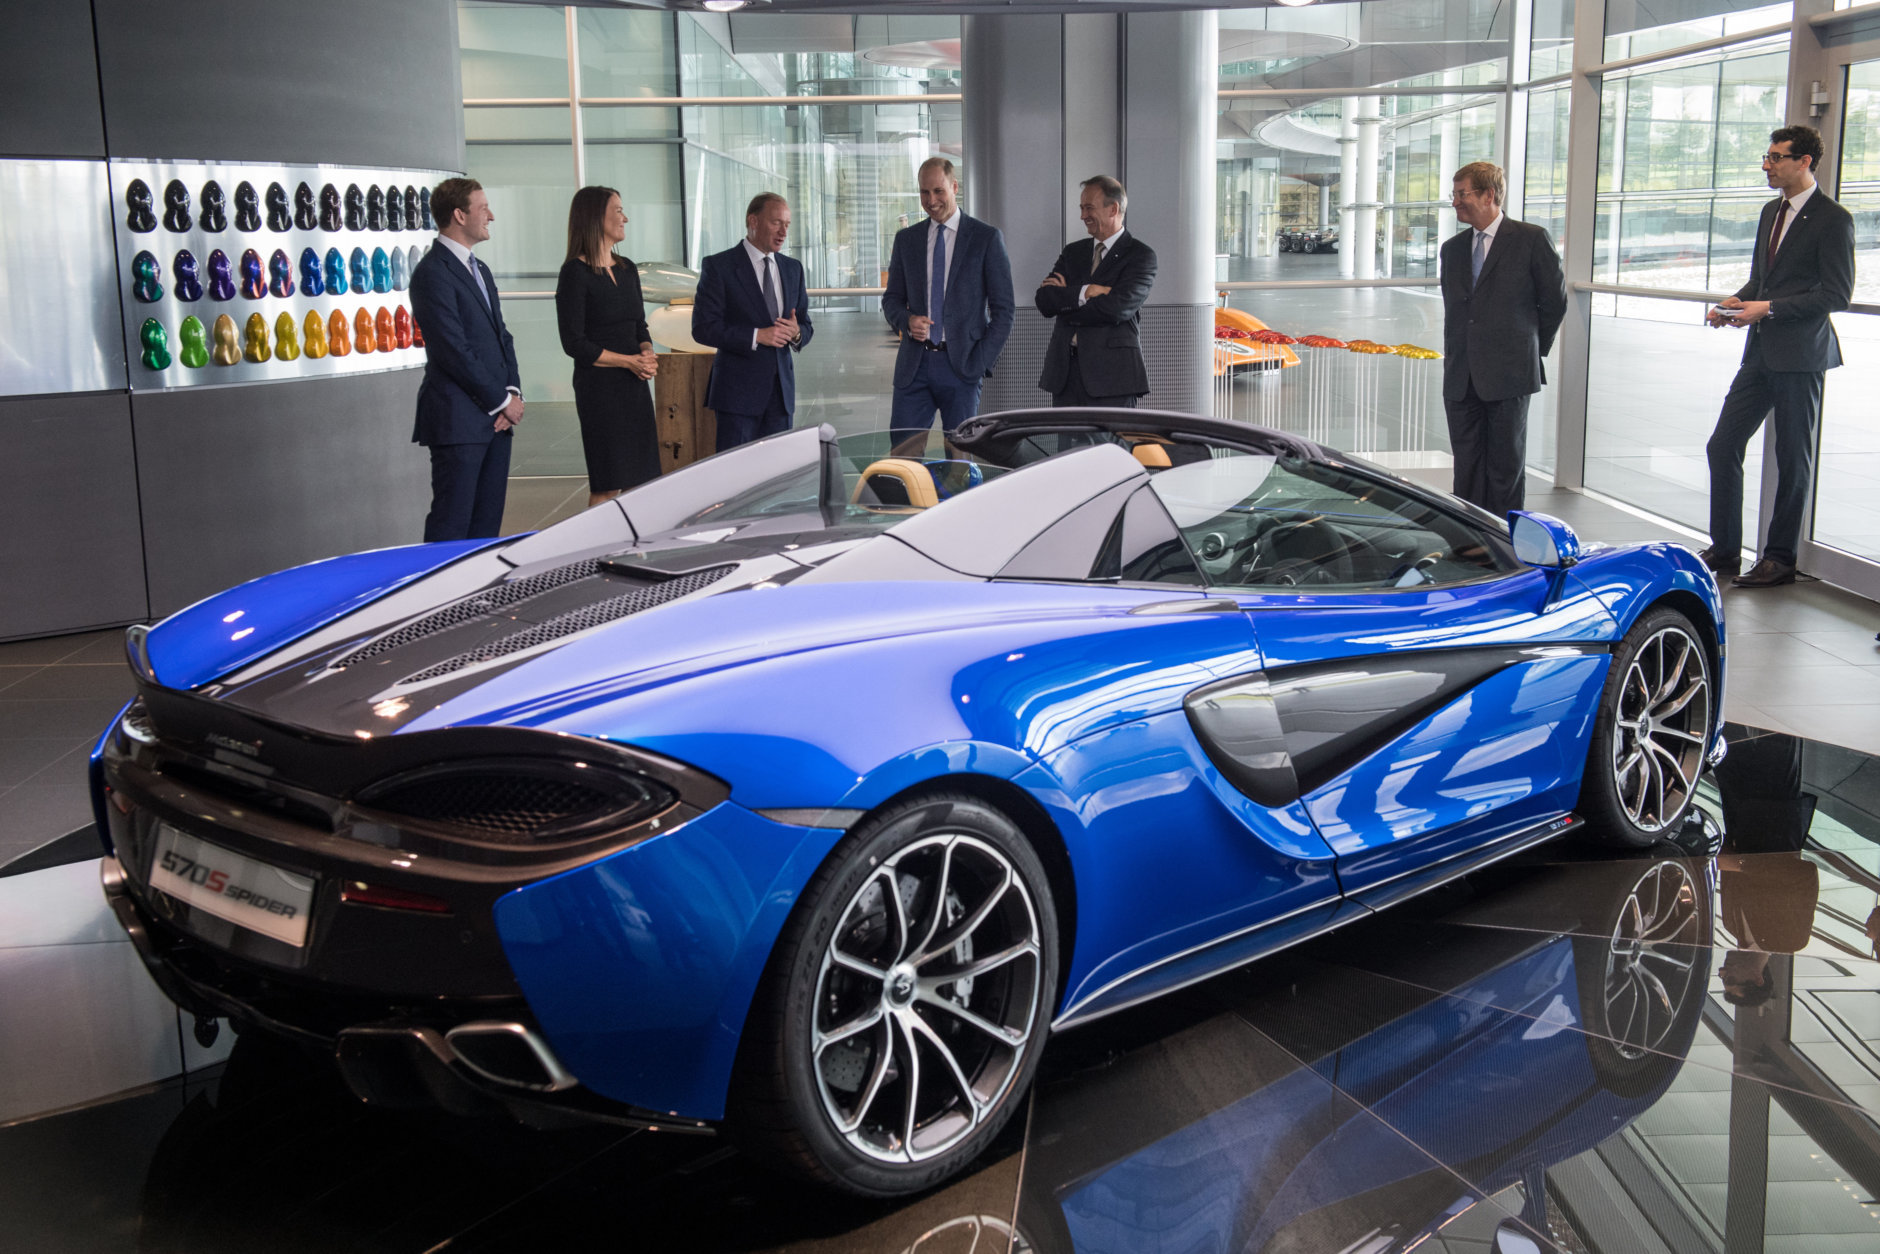 WOKING, ENGLAND - SEPTEMBER 12:   Prince William, Duke of Cambridge (C) is shown a McLaren 720S, by Mike Flewitt (3rd L), CEO of McLaren Automative during a visit to McLaren Automotive at McLaren Technology Centre on September 12, 2017 in Woking, England.  (Photo by Chris J Ratcliffe - WPA Pool/Getty Images)